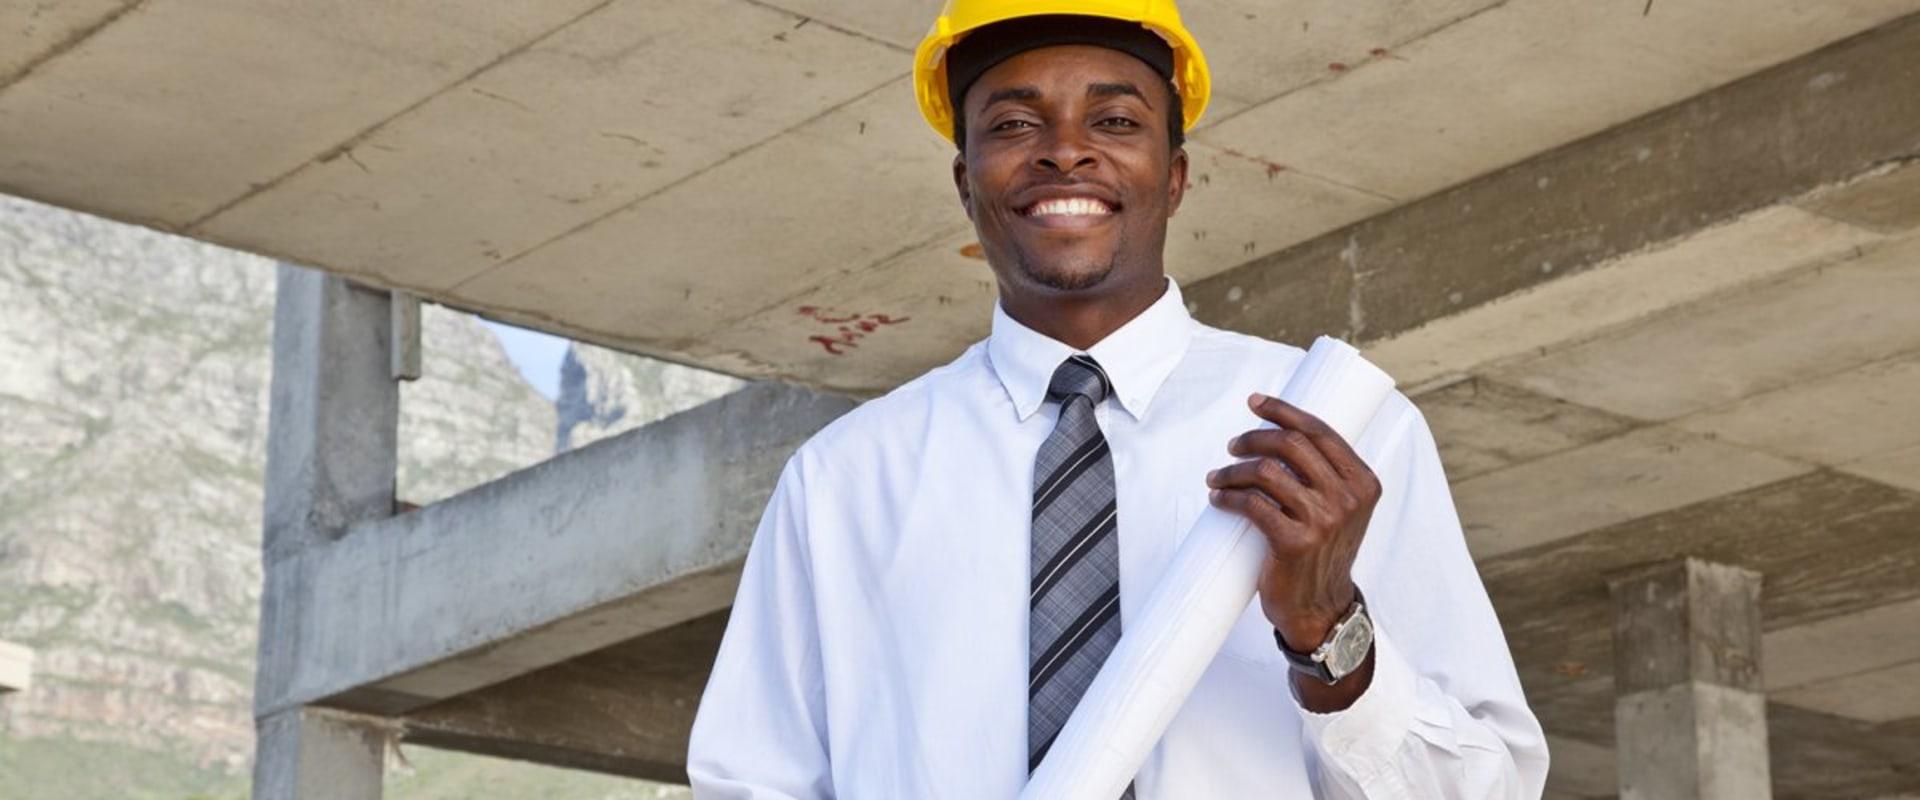 How hard is it to become a construction engineer?